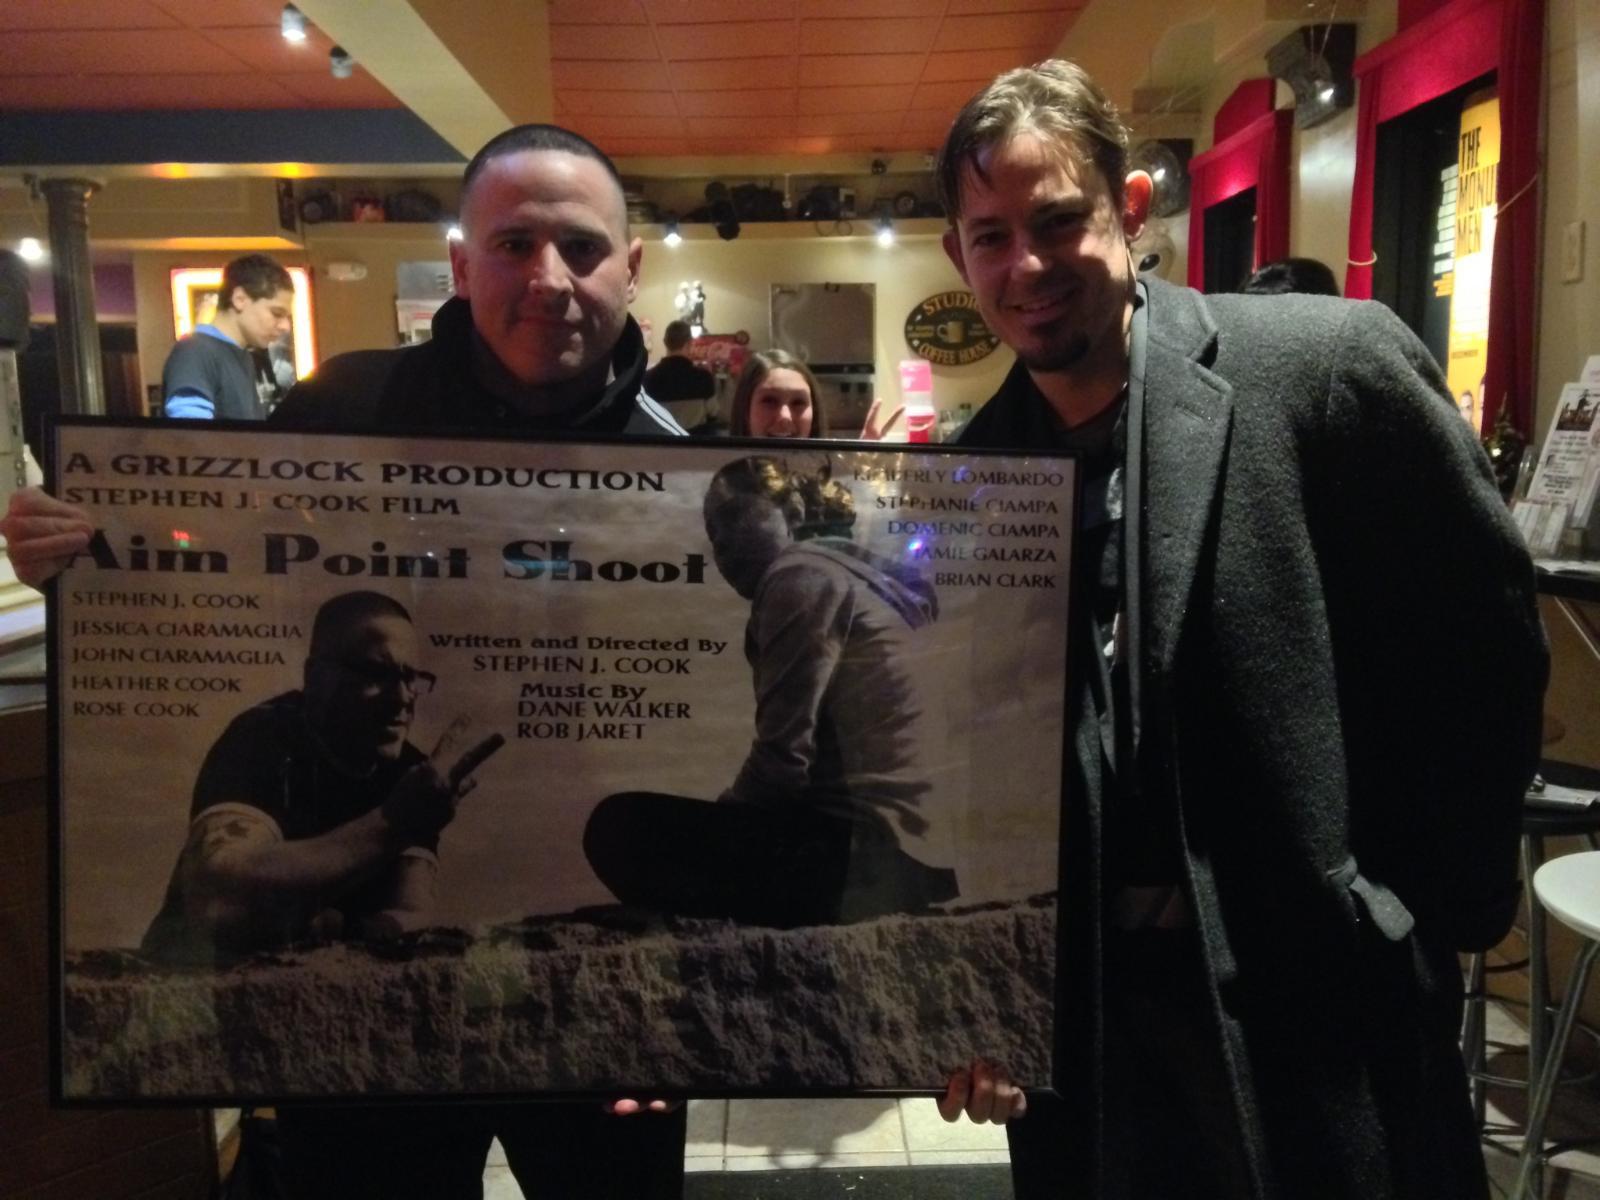 Stephen Cook with Composer, Dane Walker at private screening of Aim Point Shoot (2013)